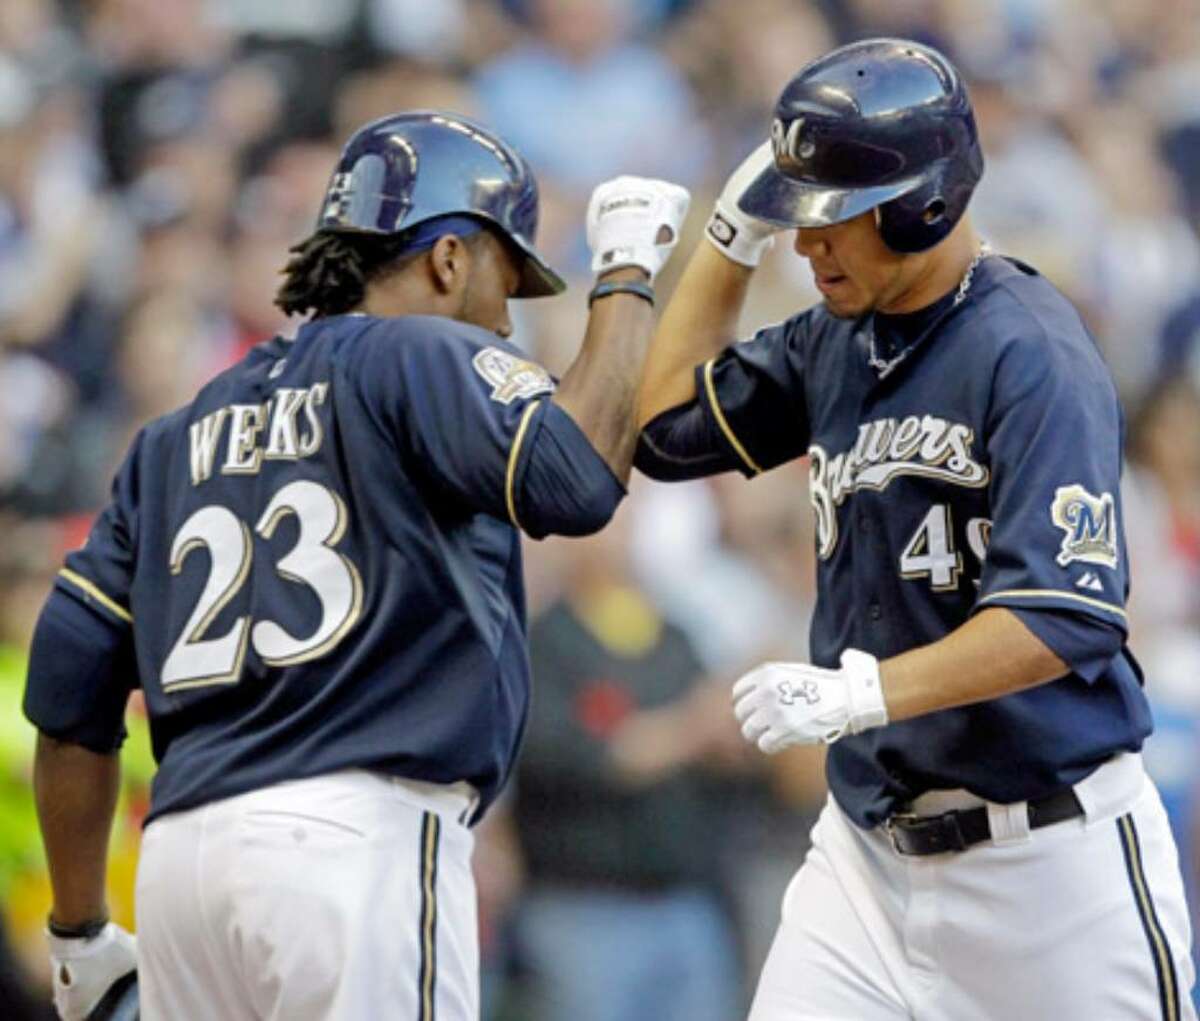 Brewers pitcher Yovani Gallardo (right) is congratulated by teammate Rickie Weeks after hitting a home run.